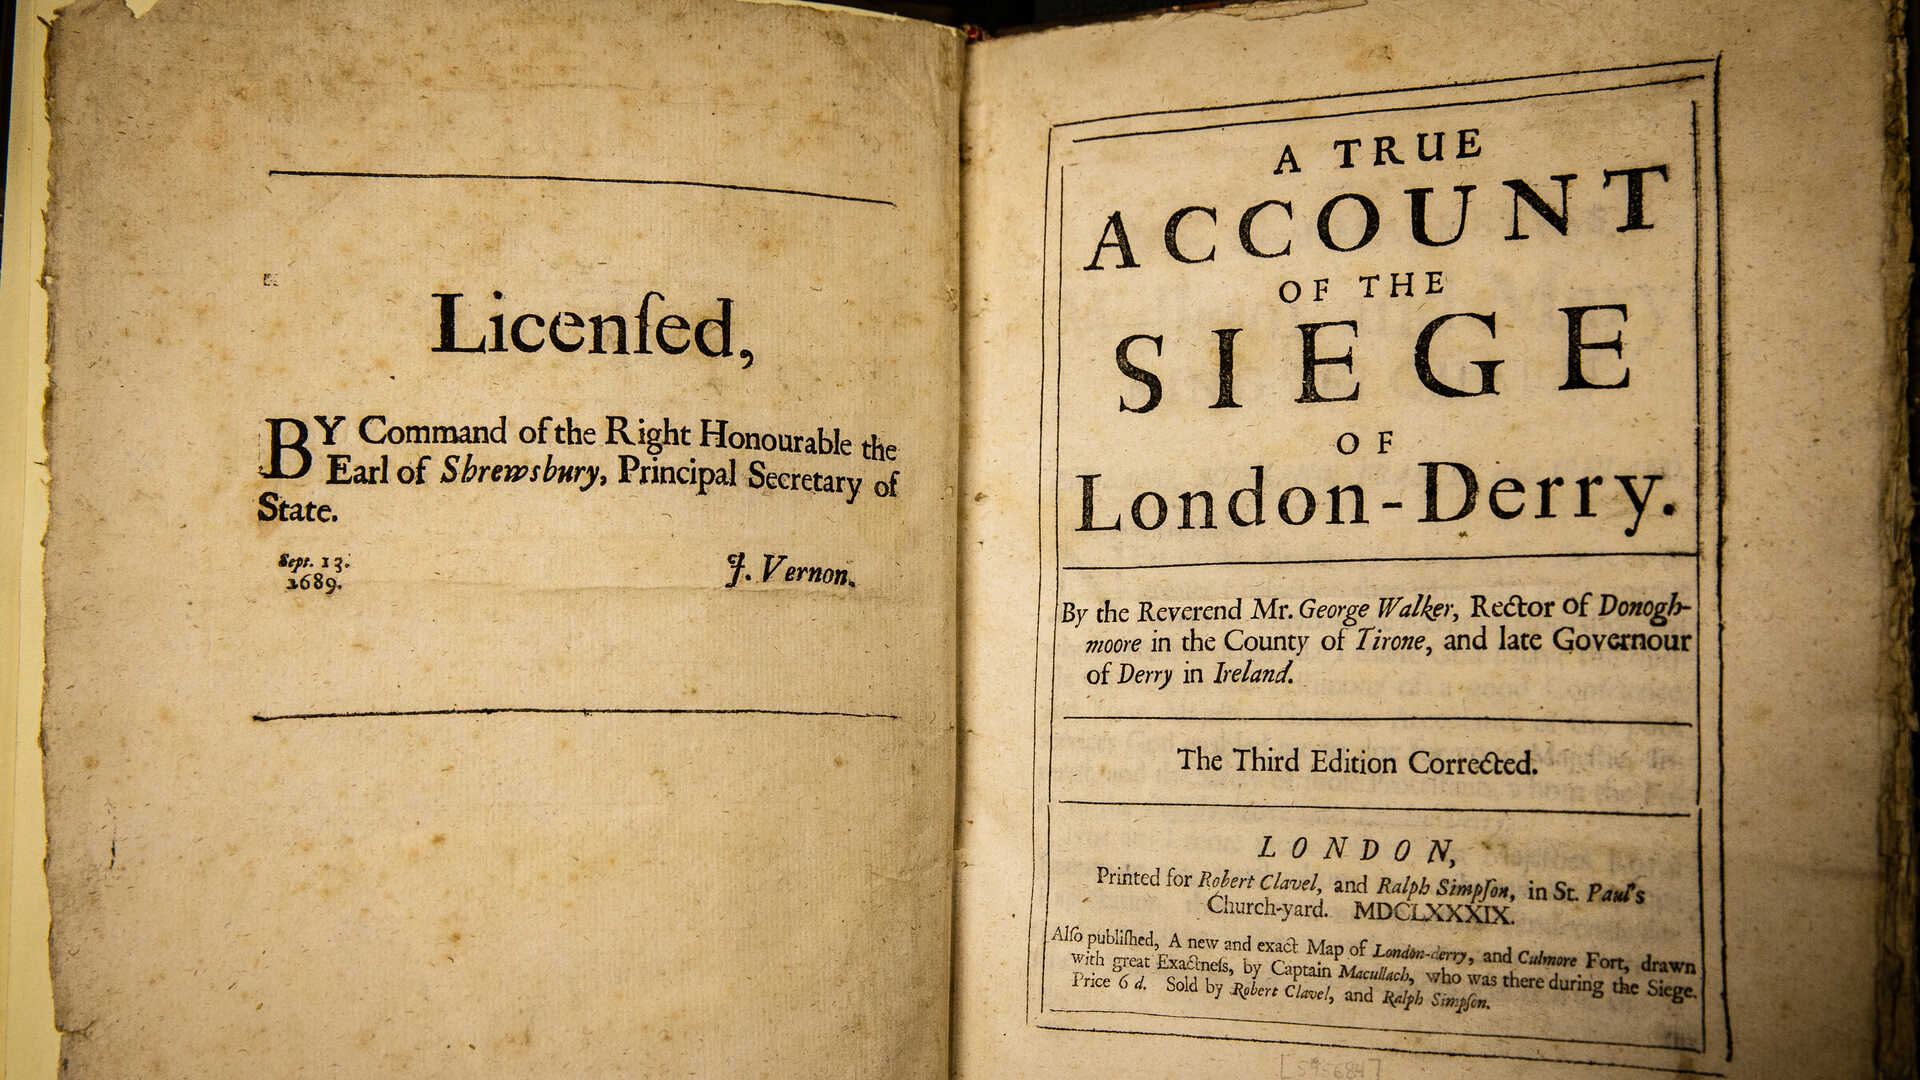 Pages from A True Account of the Siege of London-Derry